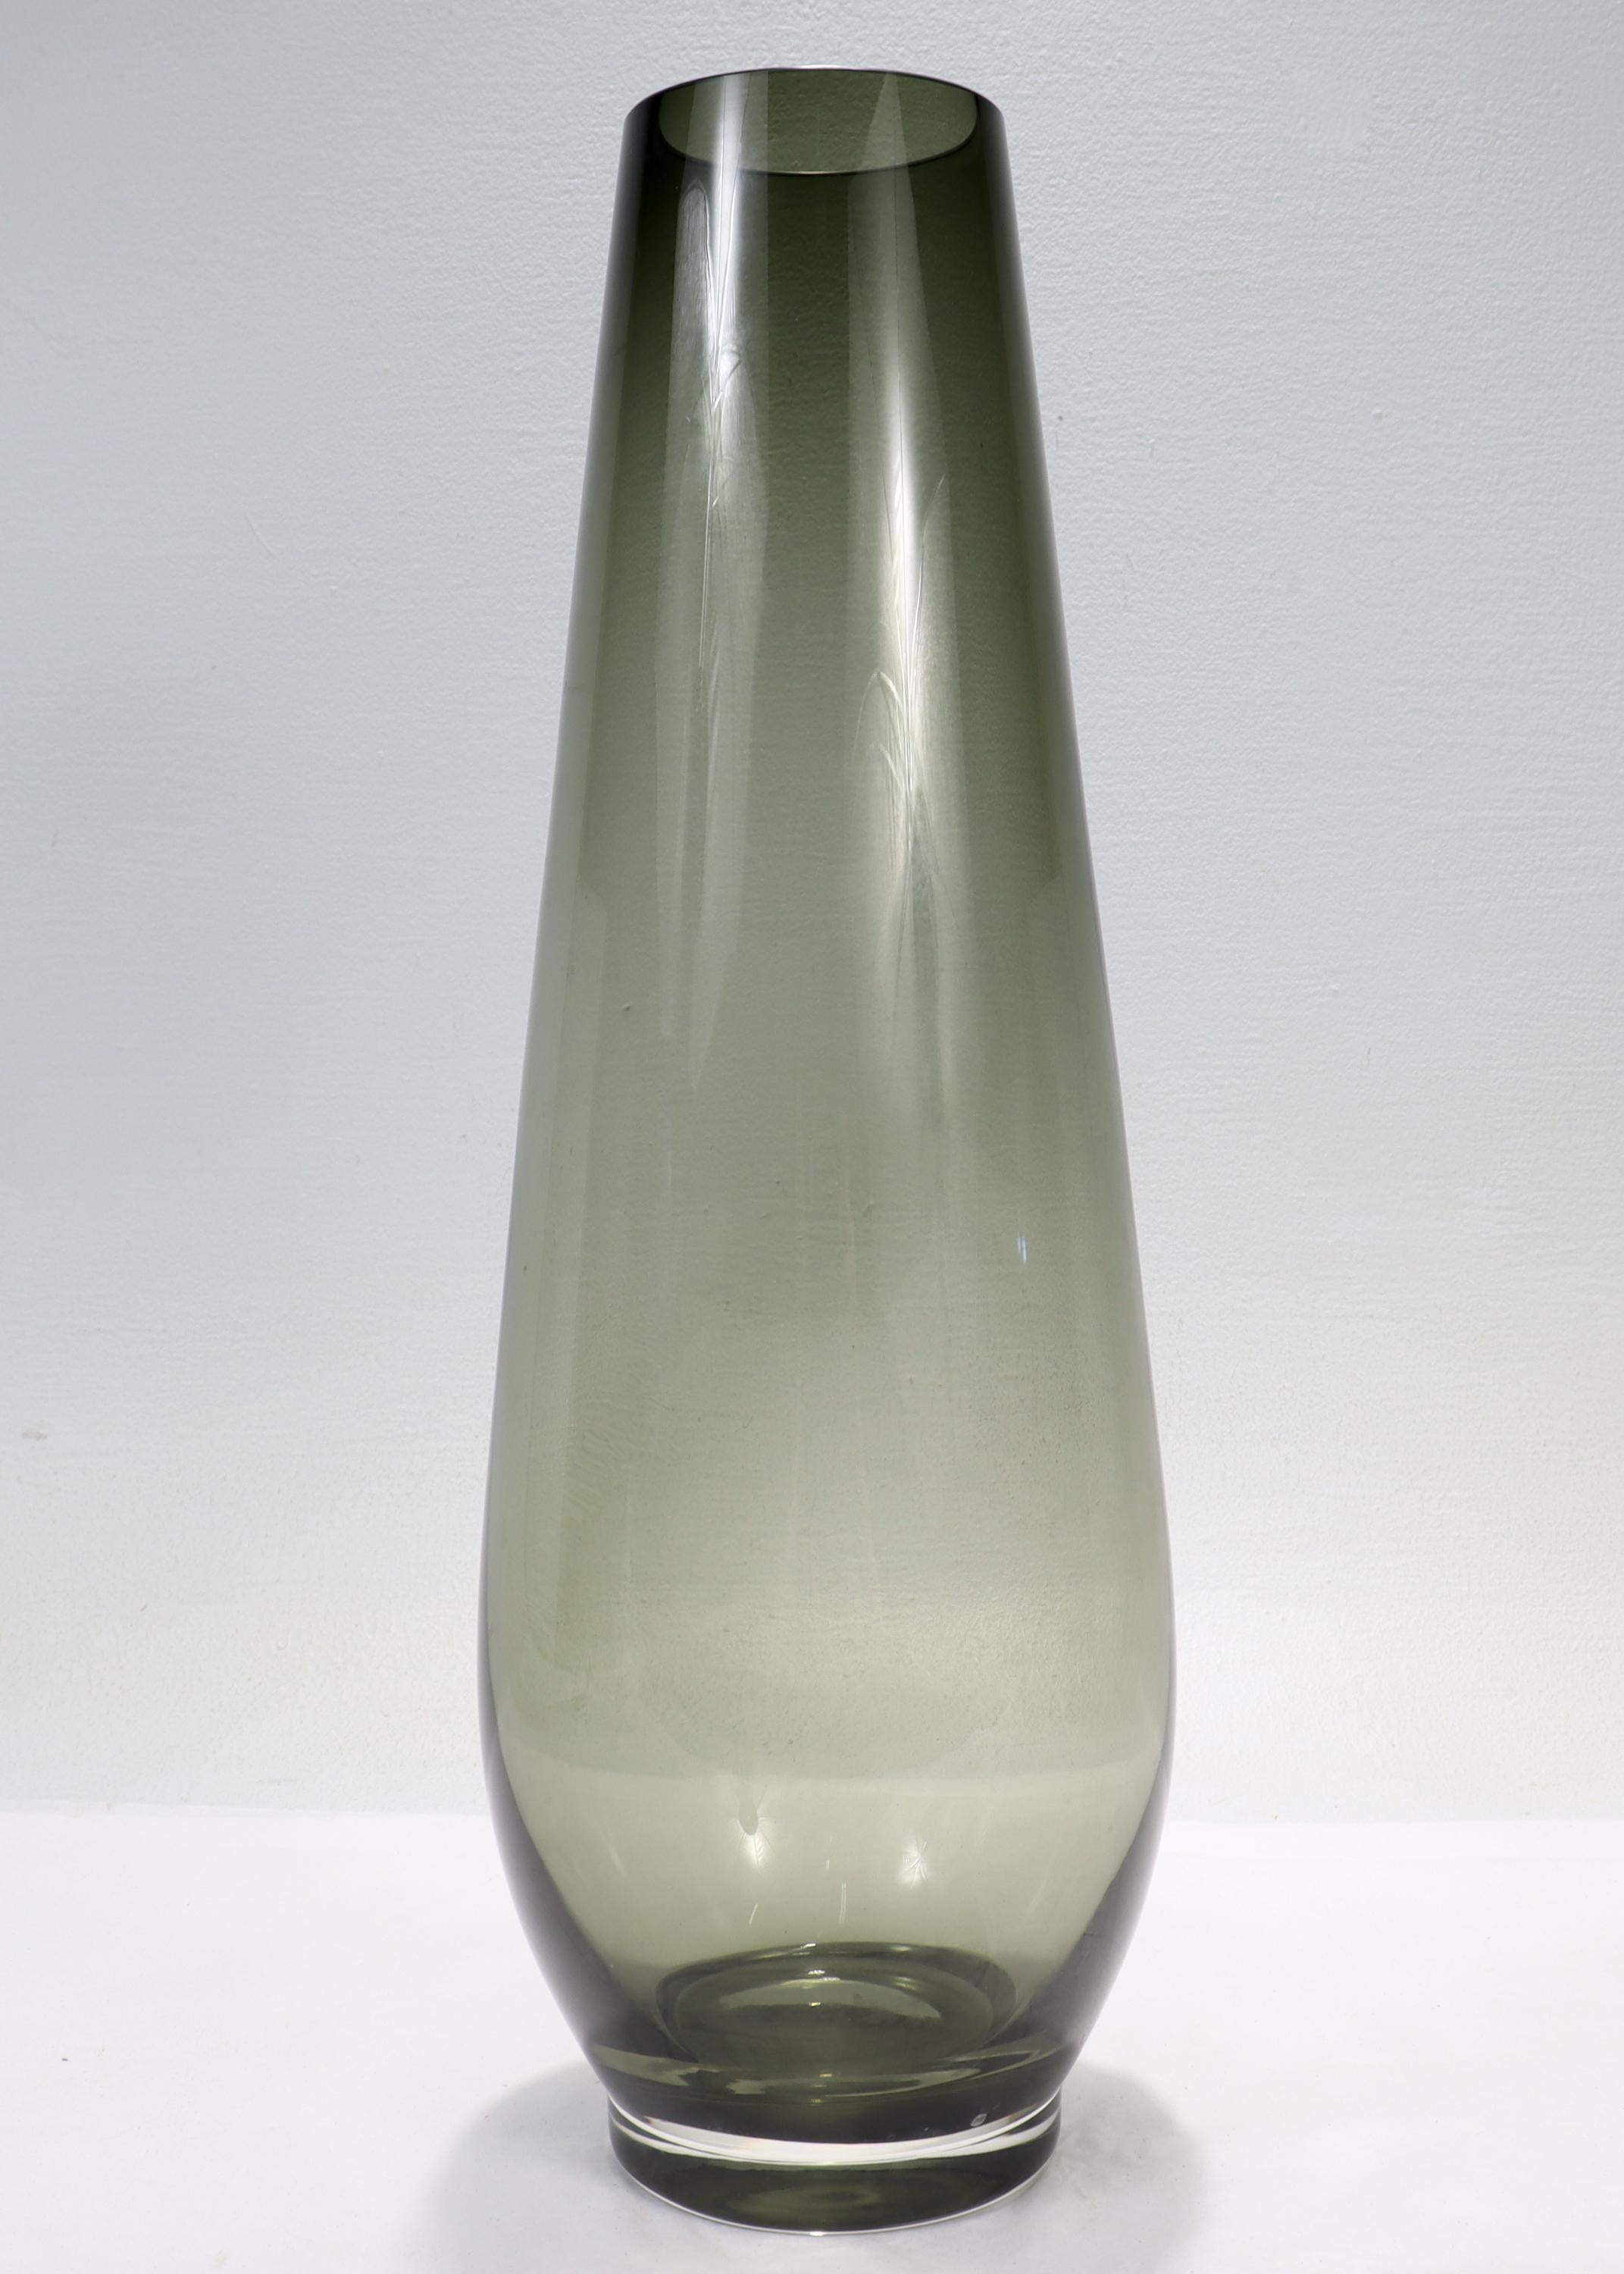 A fine Mid-Century Modern art glass vase.

Attributed to Gullaskruf.

Simply a great Scandinavian Modern vase!

Date:
Mid-20th Century

Overall Condition:
It is in overall good, as-pictured, used estate condition with no chips, cracks, or